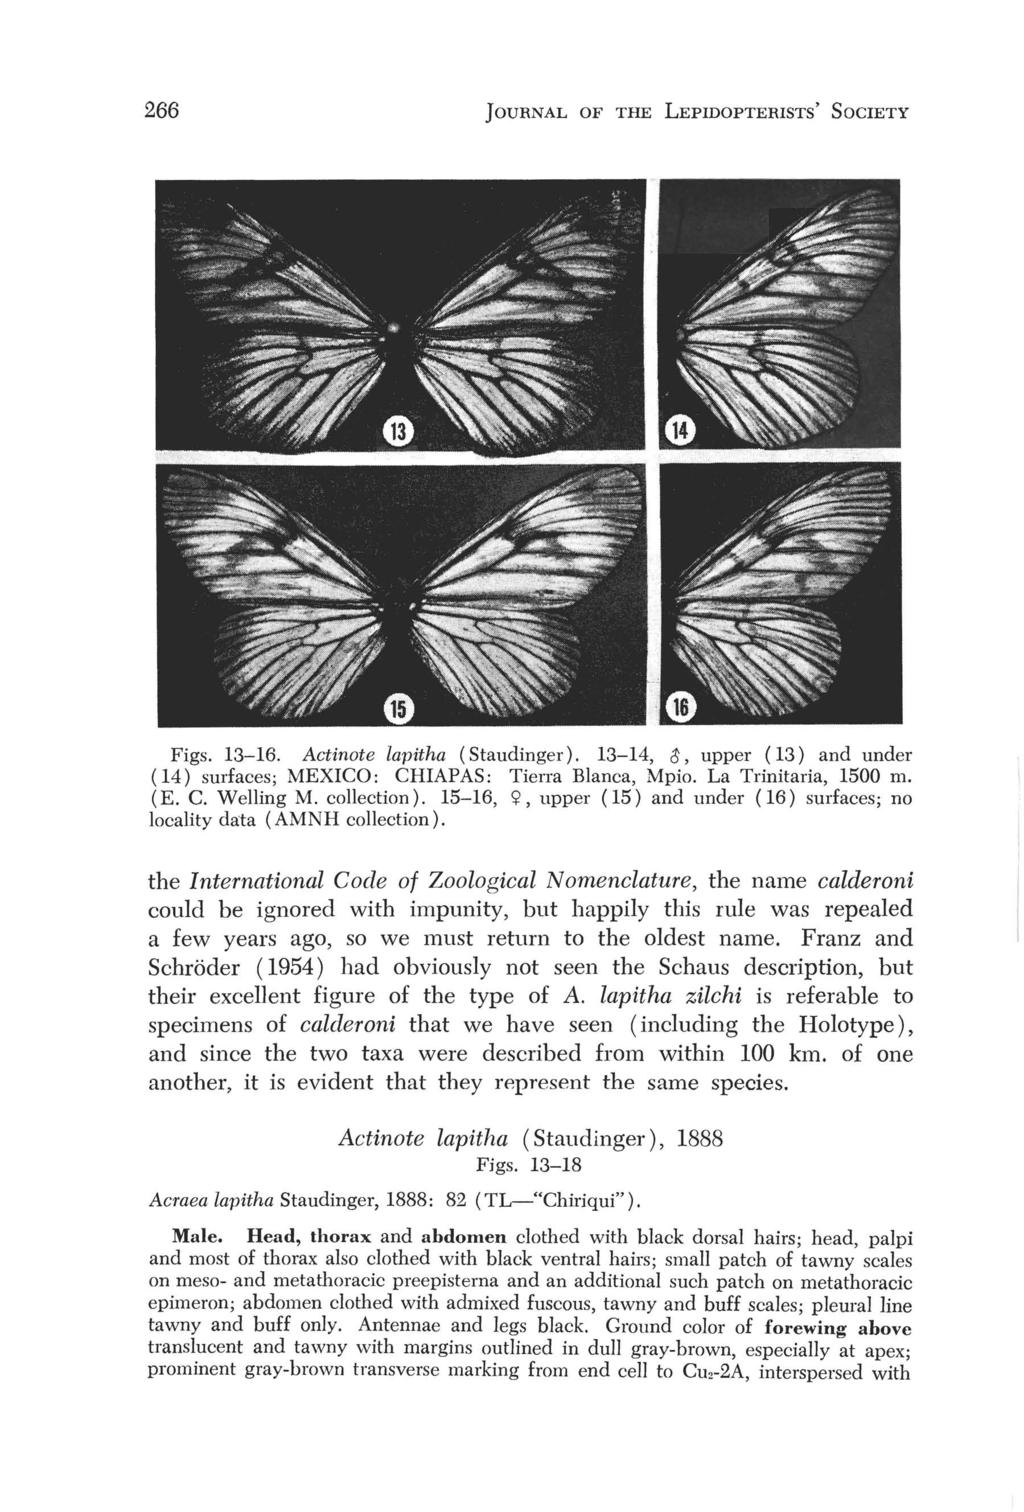 266 JOURNAL OF THE LEPIDOPTERISTS' SOCIETY Figs. 13-16. Actinote lapitha (Staudinger). 13-14, is, upper (13) and under ( 14) surfaces; MEXICO: CHIAPAS: Tierra Blanca, Mpio. La Trinitaria, 1500 m. (E.